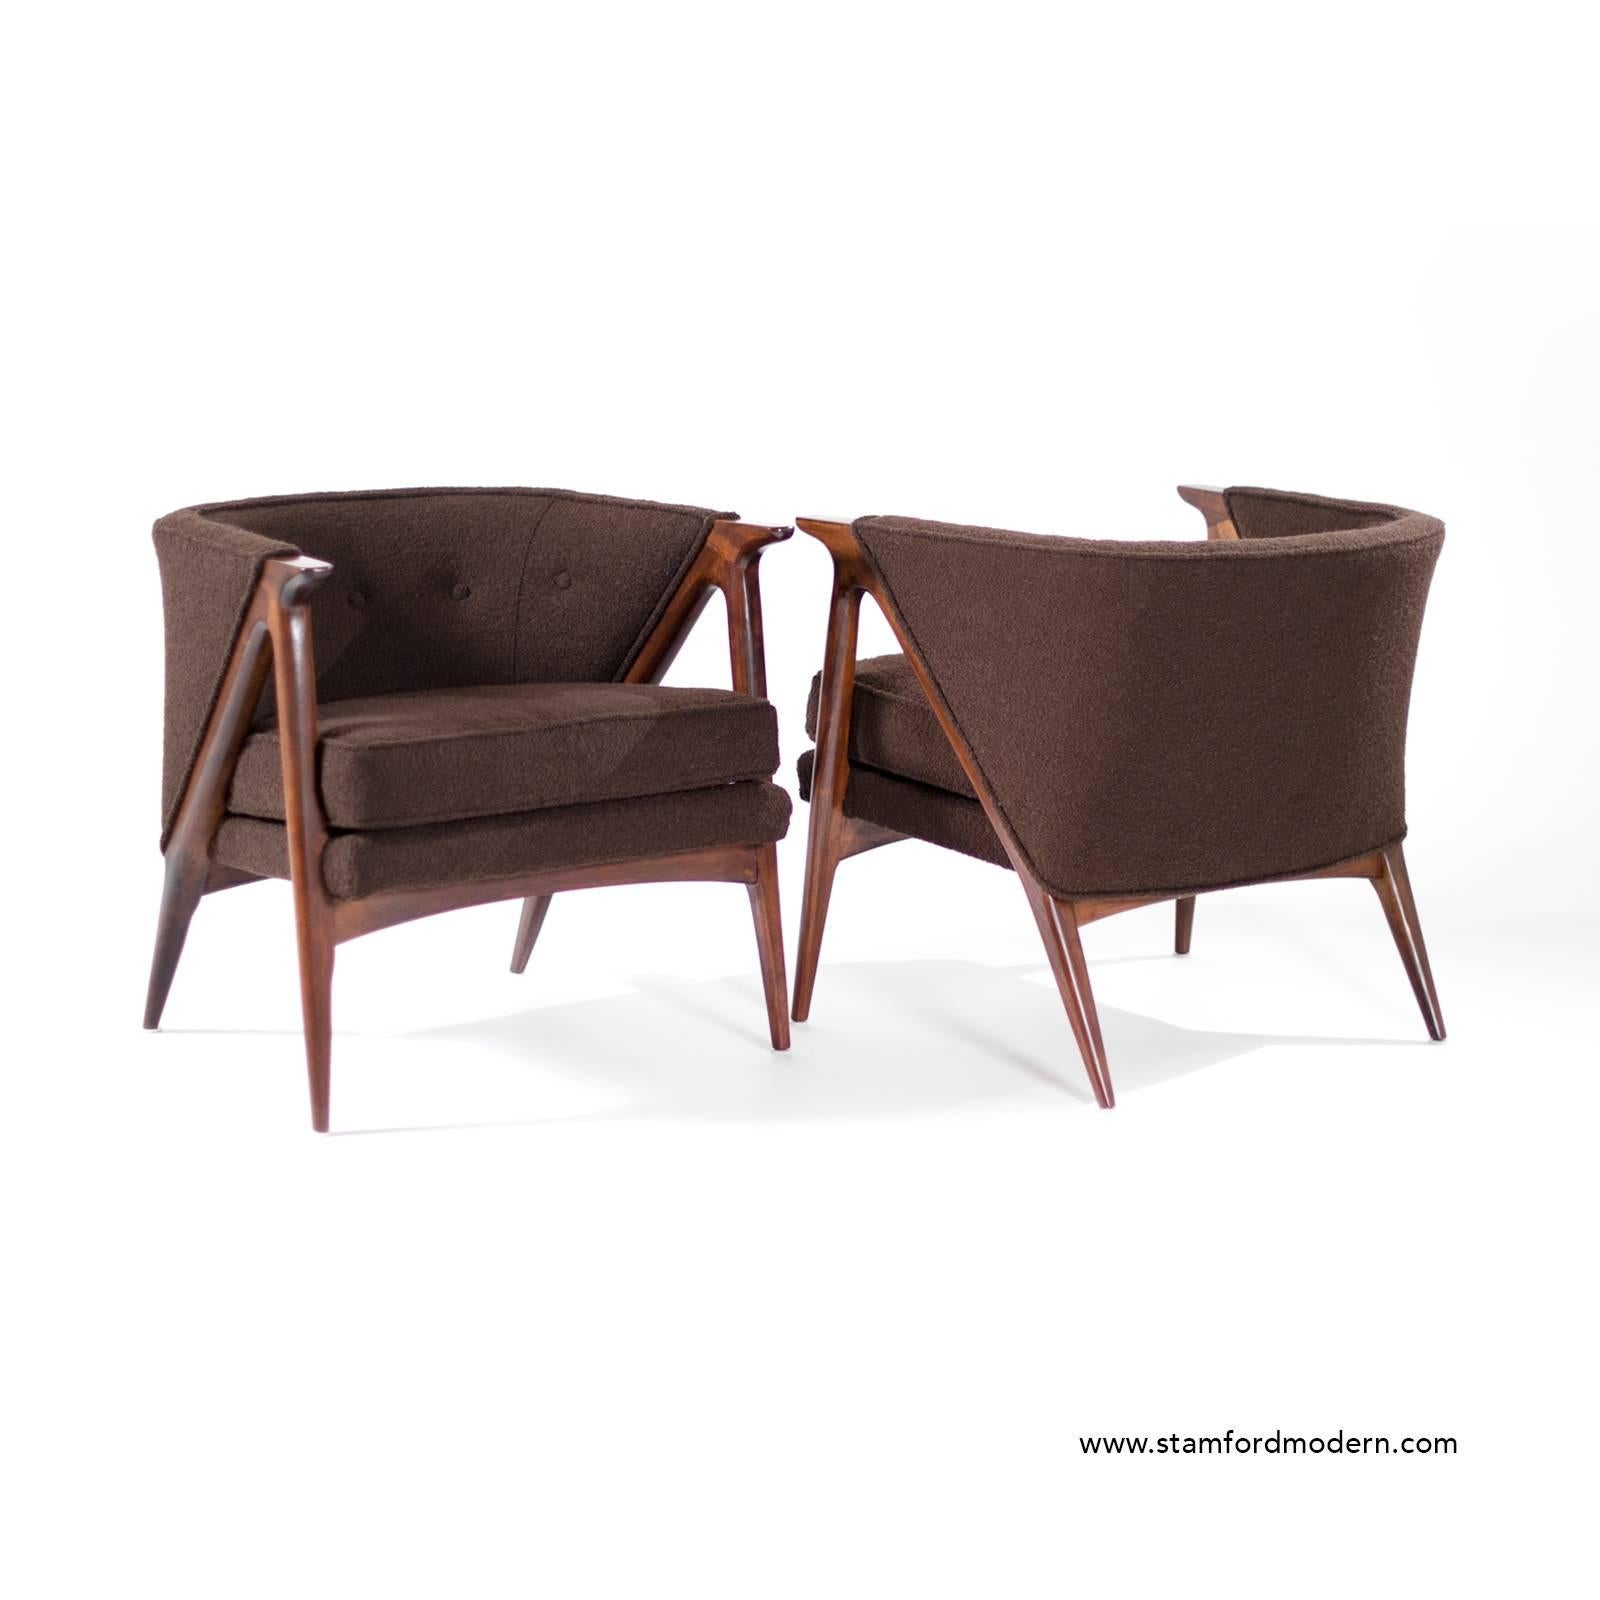 20th Century Pair of Sculptural Danish Modern Lounge Chairs, 1950s